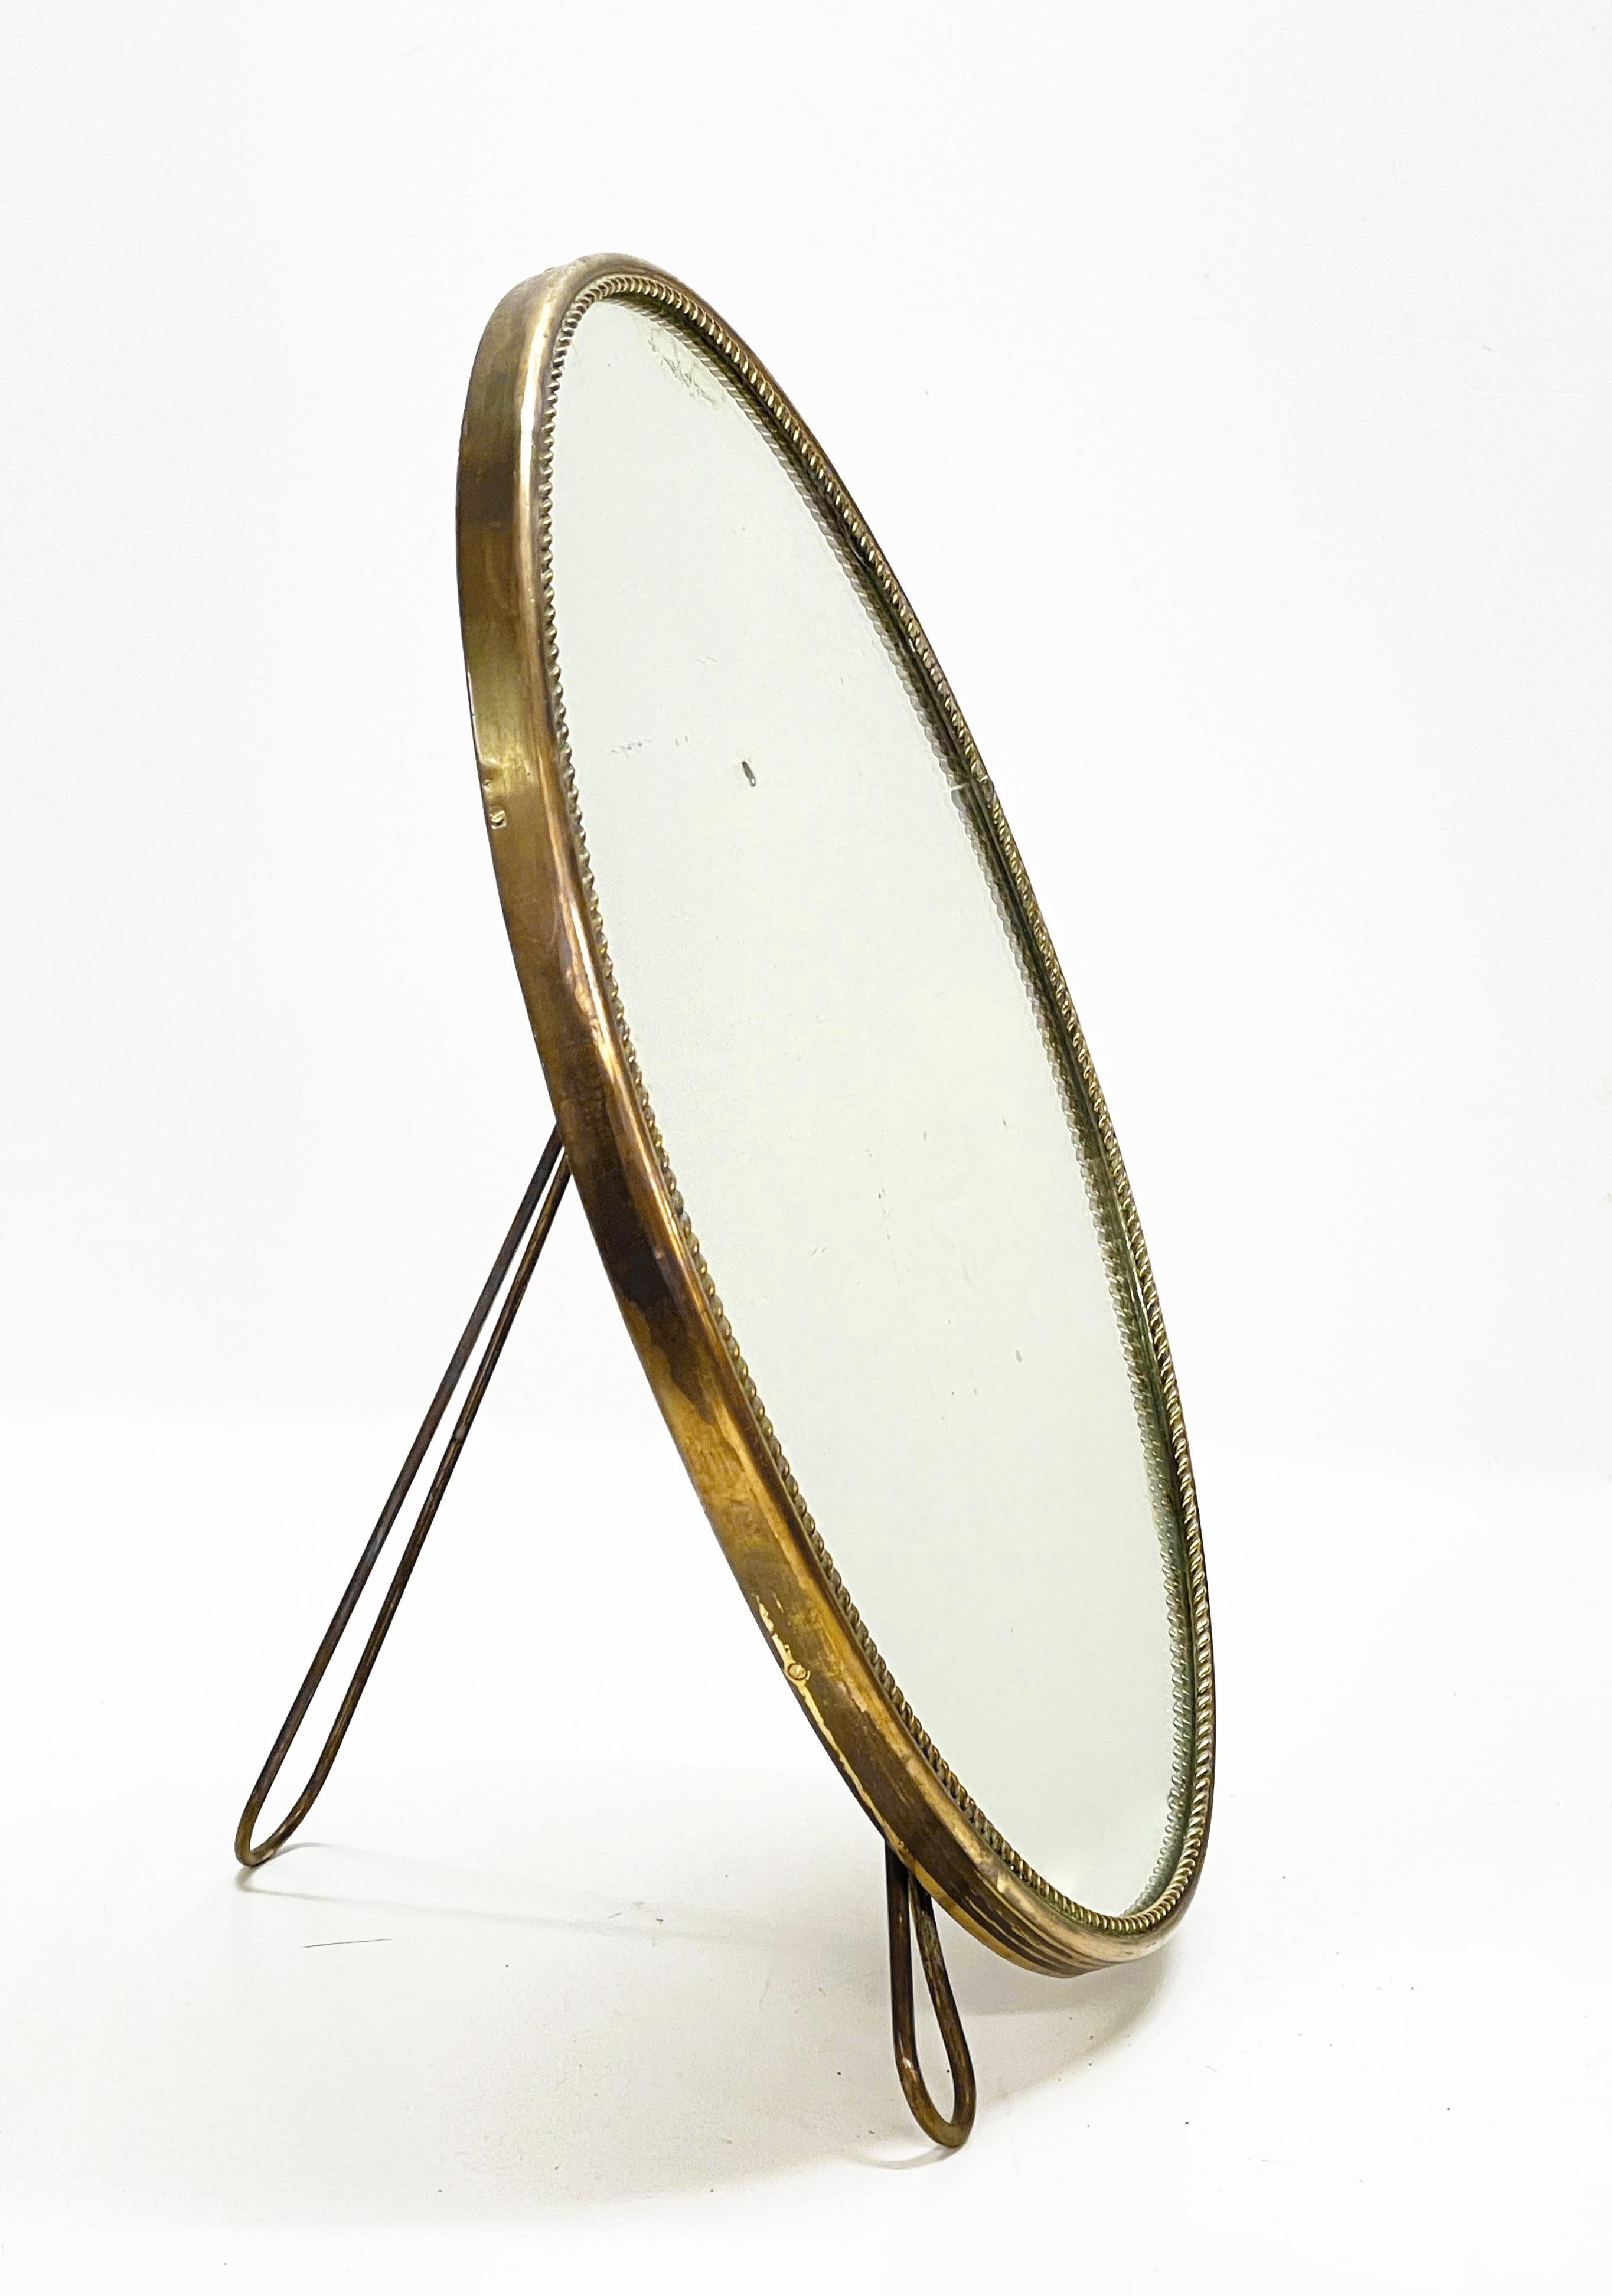 Incredible midcentury adjustable table mirror with fantastic decorate brass frame. This fantastic object was produced in Italy in the 1950s.

This piece is fantastic for its smooth lines and the elegant decorate frame, it is very adaptable as the